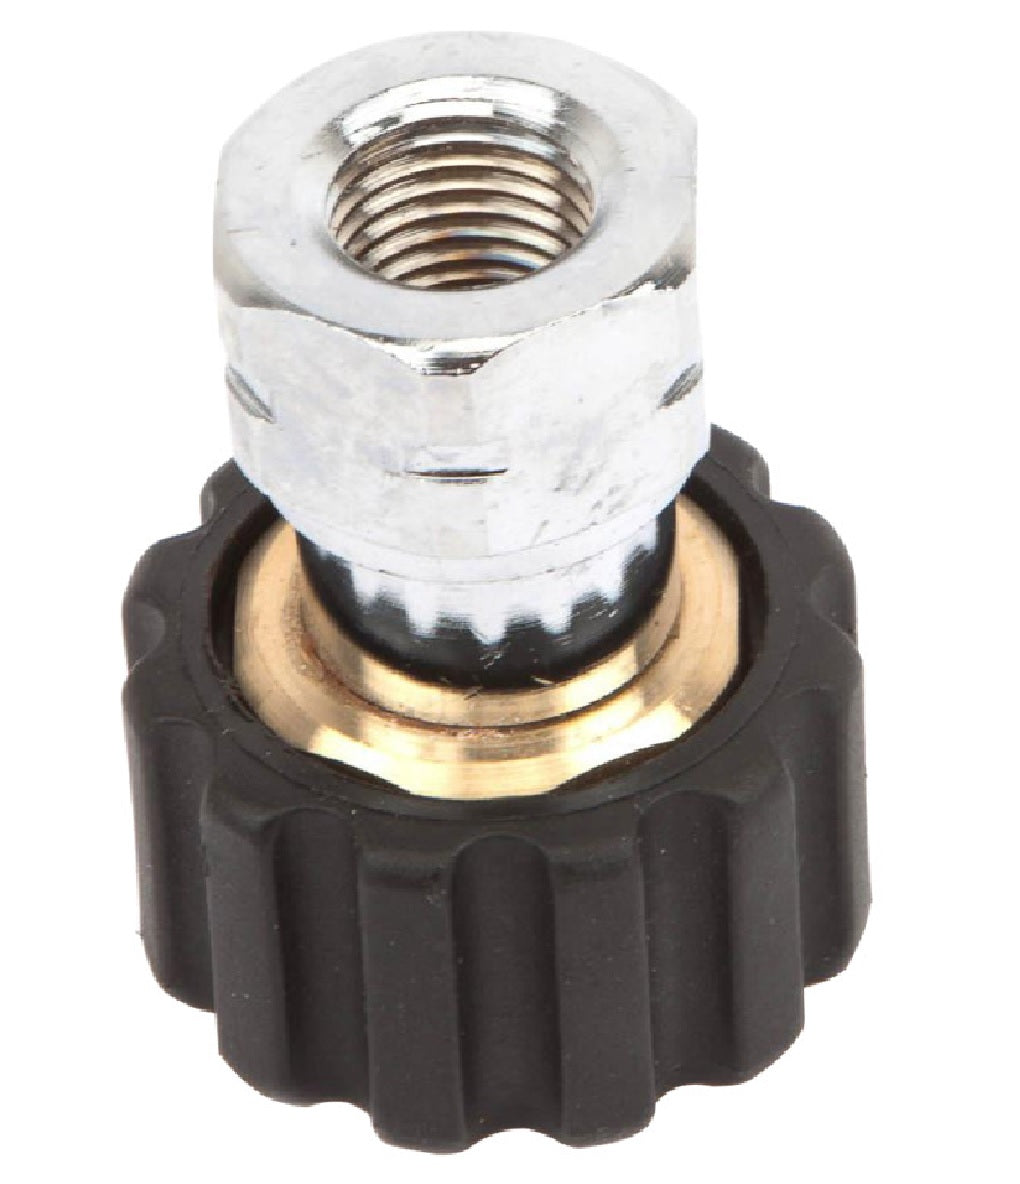 Forney 75106 Female Screw Coupling, 1/4 Inch